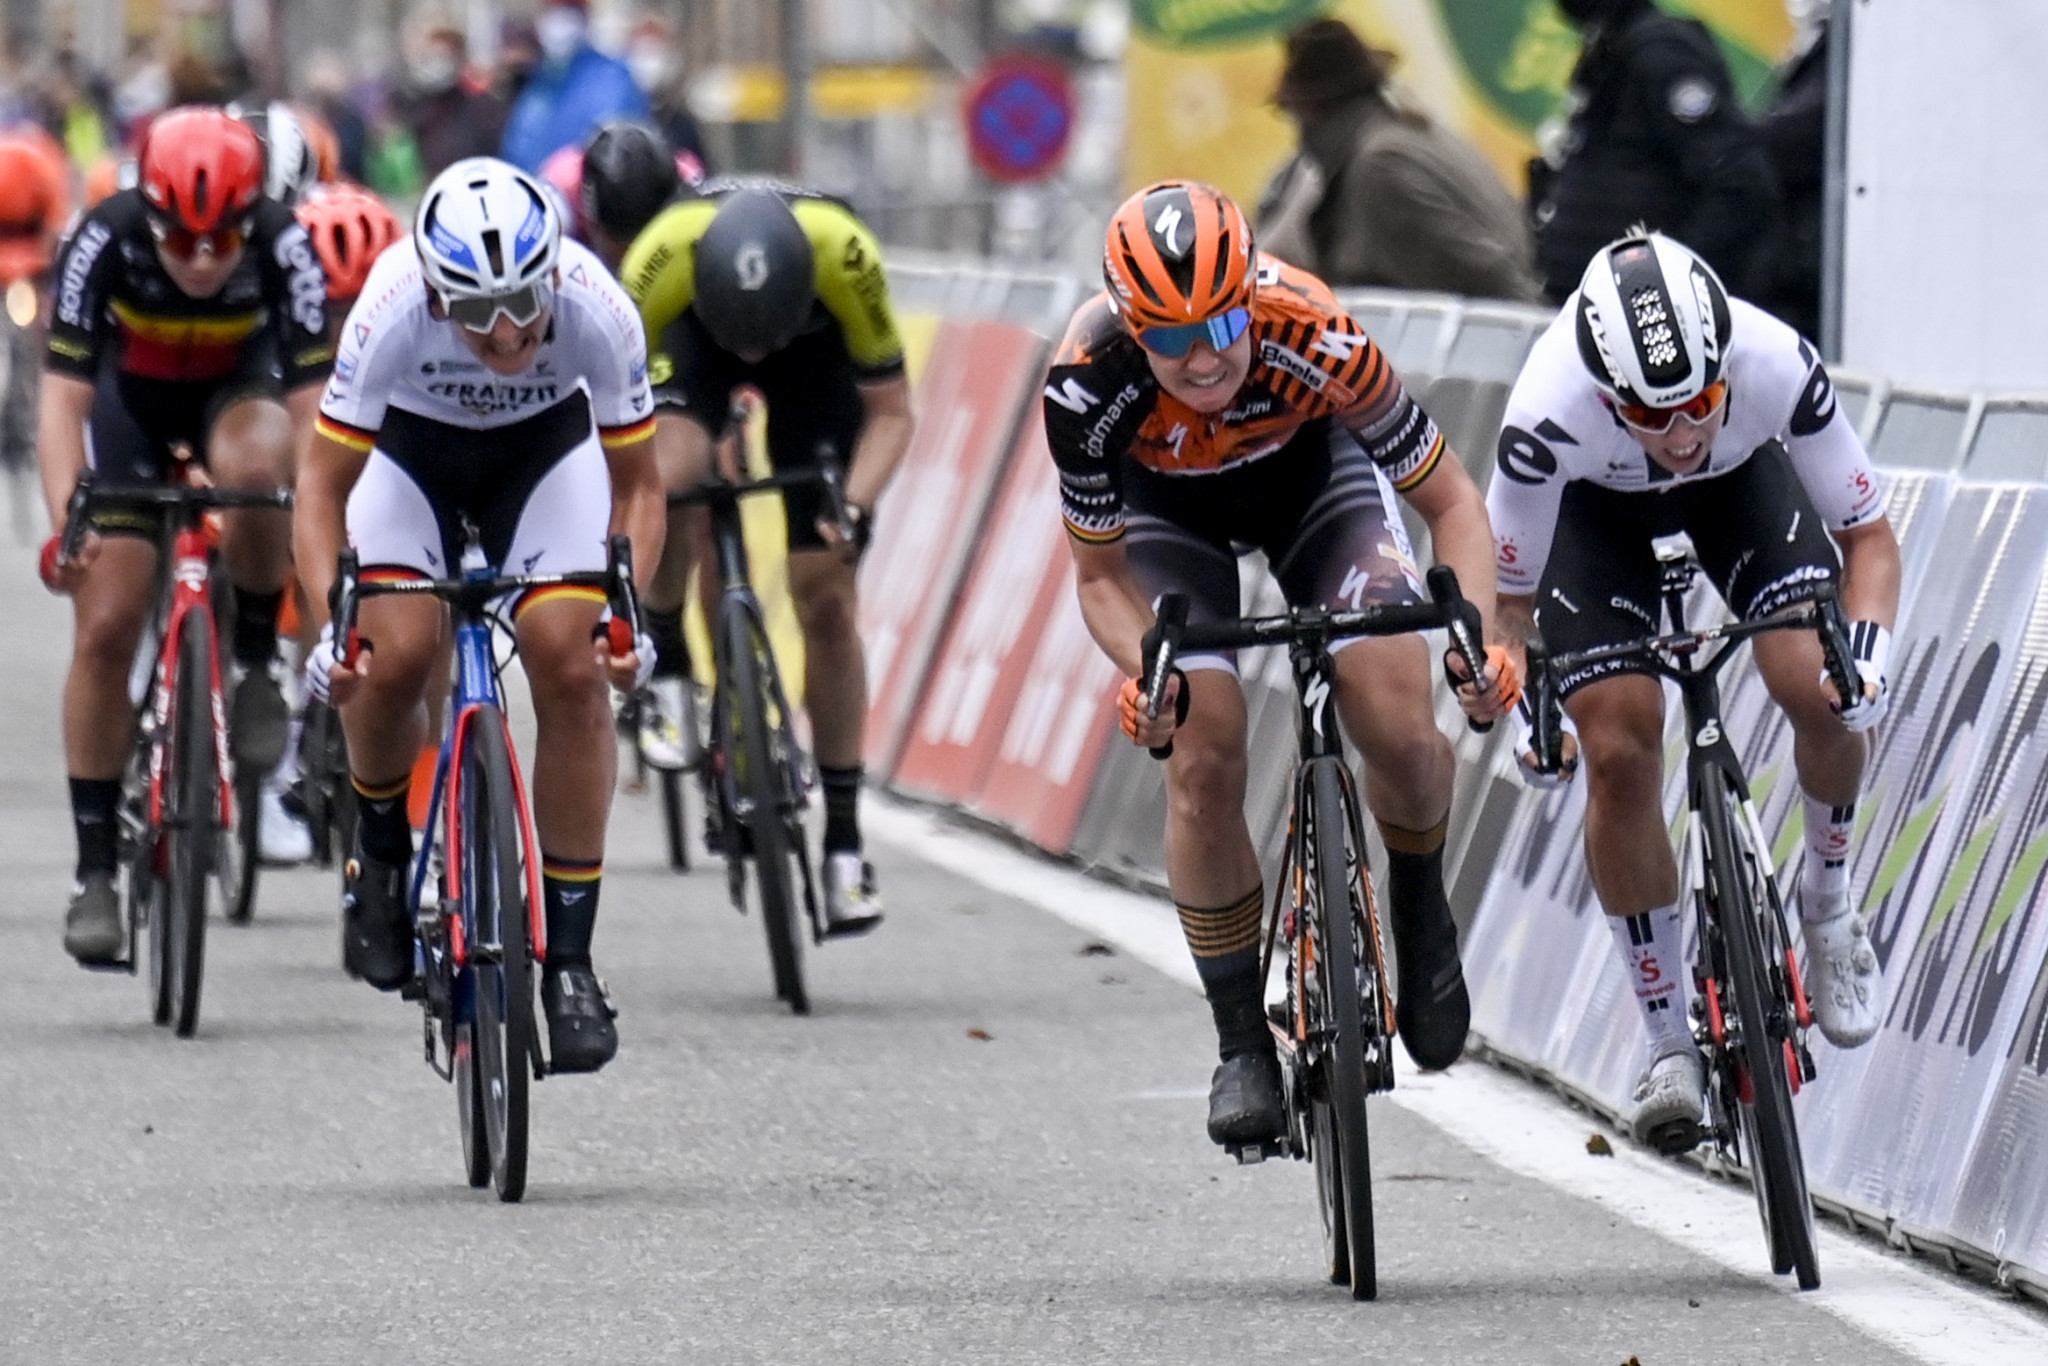 Wiebes backs up Bruges-De Panne triumph with Madrid Challenge stage win